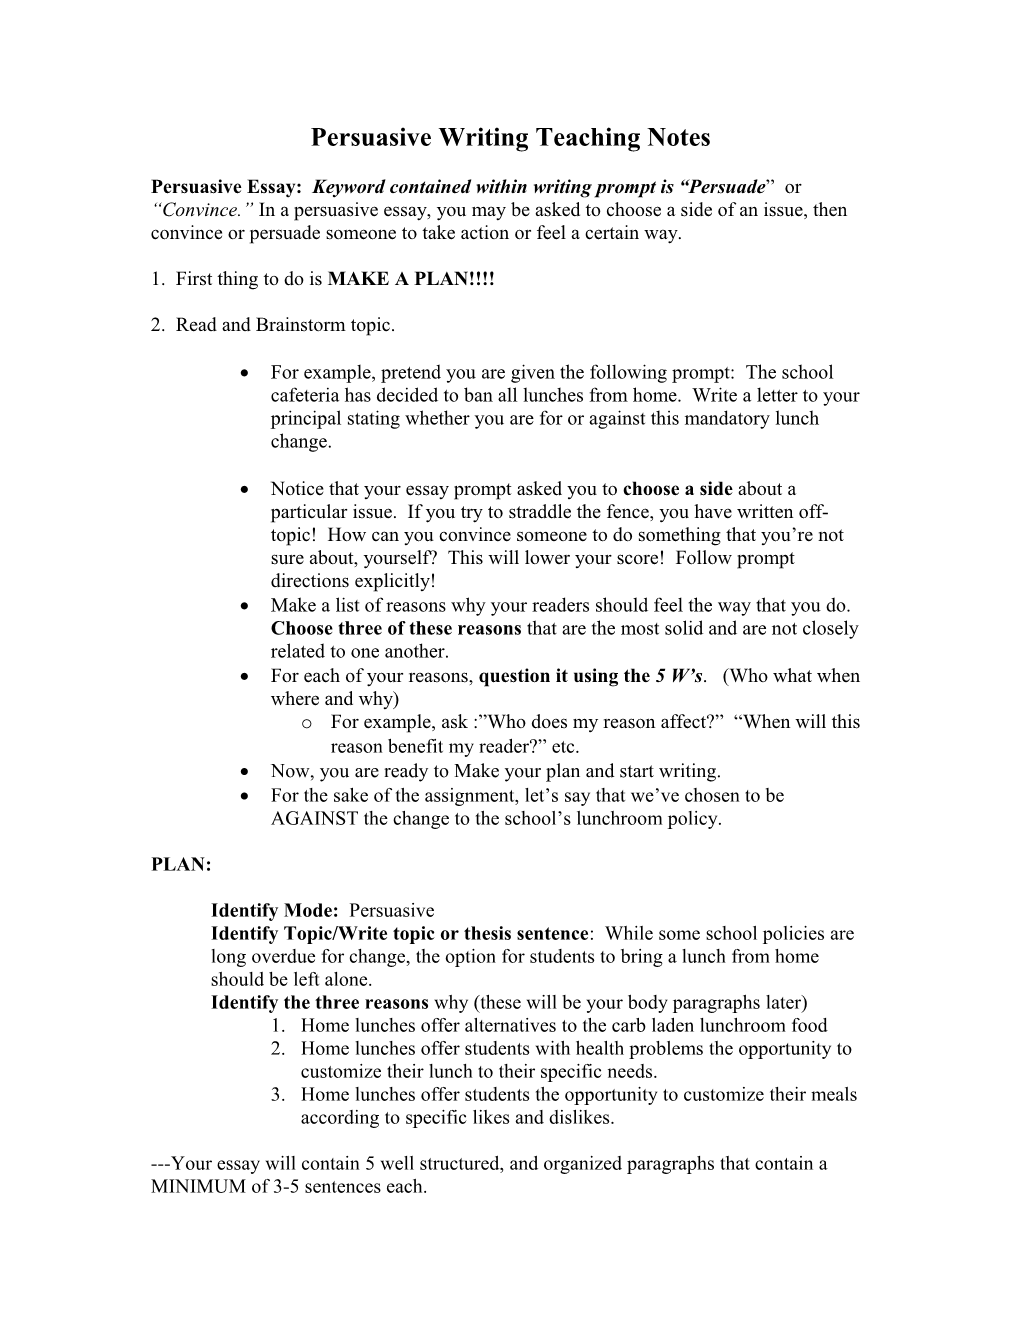 Expository Writing Teaching Notes